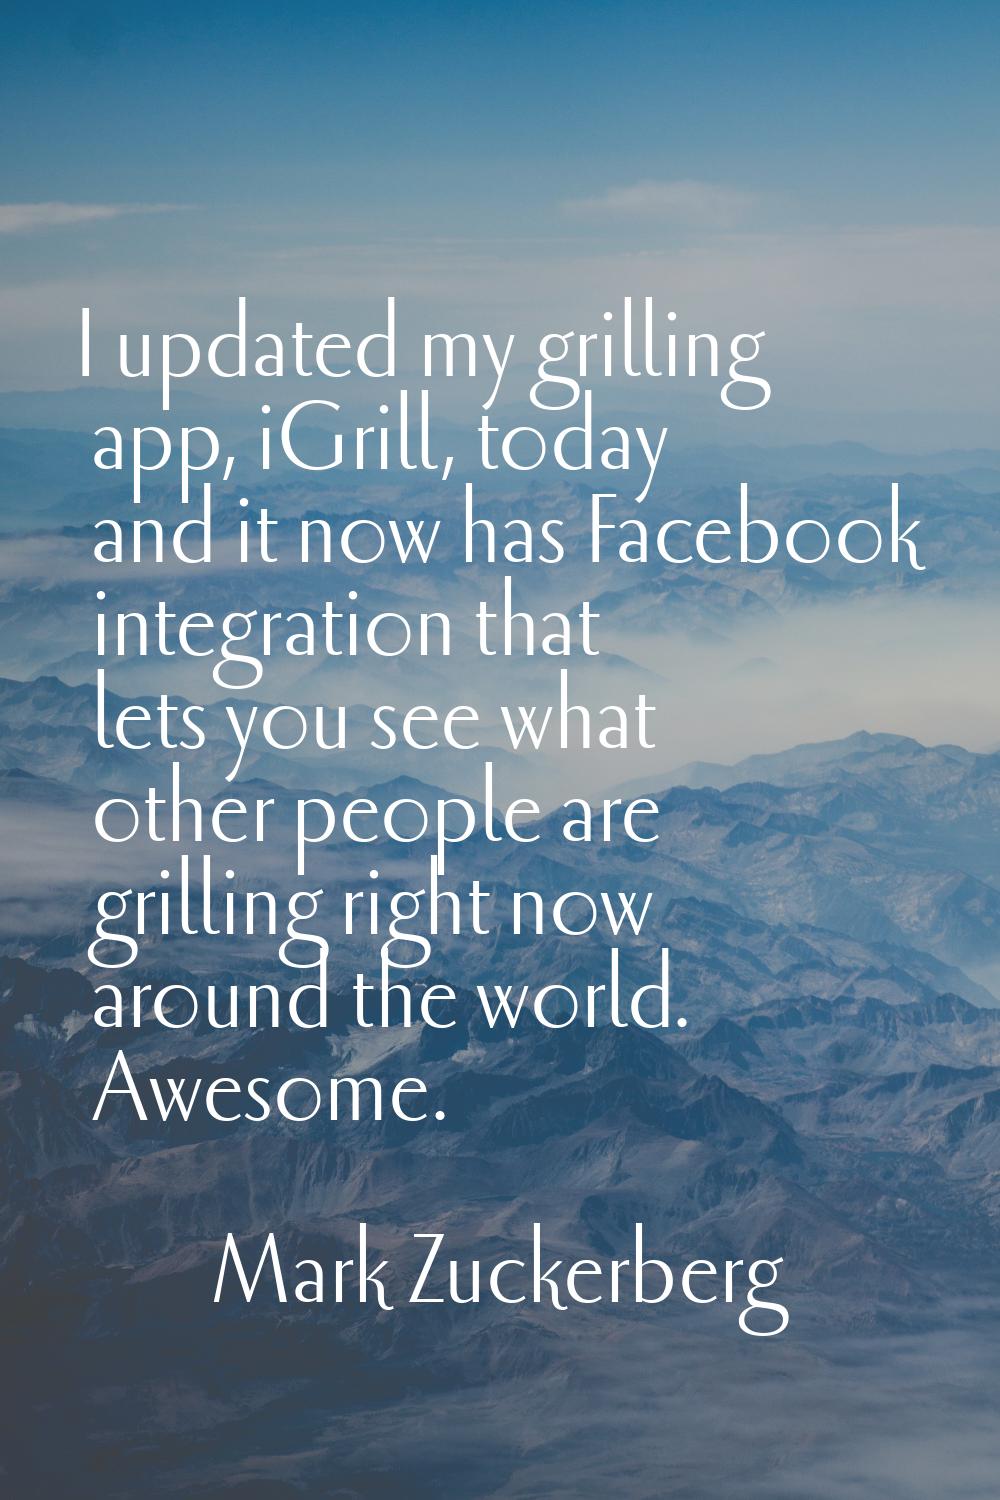 I updated my grilling app, iGrill, today and it now has Facebook integration that lets you see what